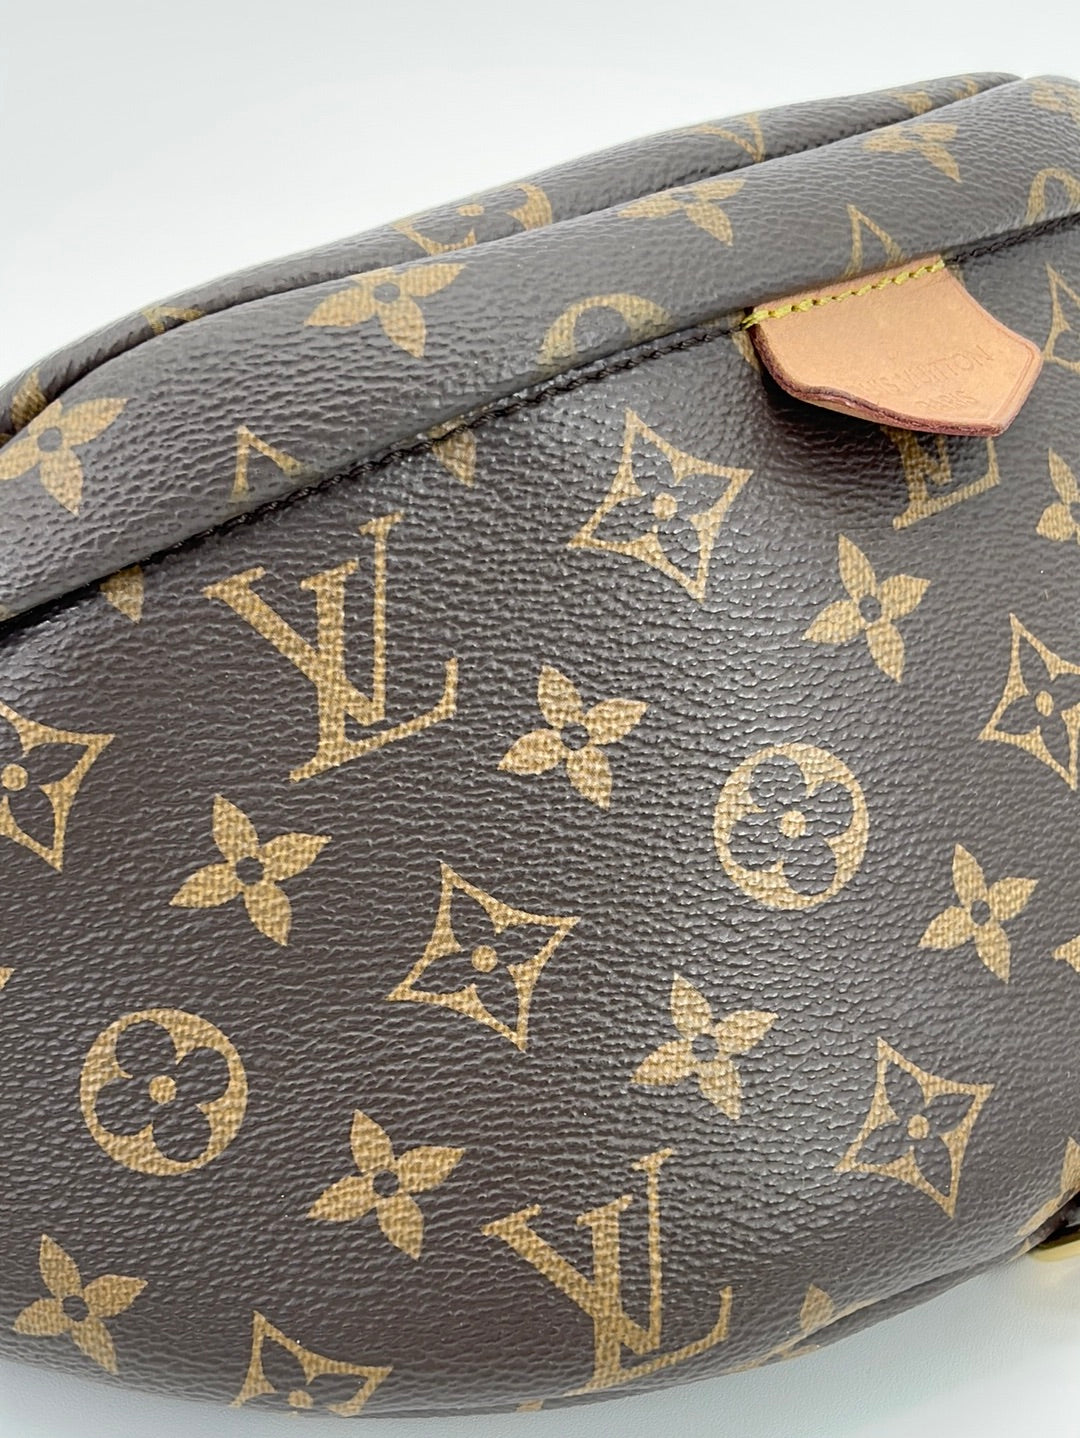 Louis Vuitton pre-owned Galaxy Discovery belt bag - ShopStyle